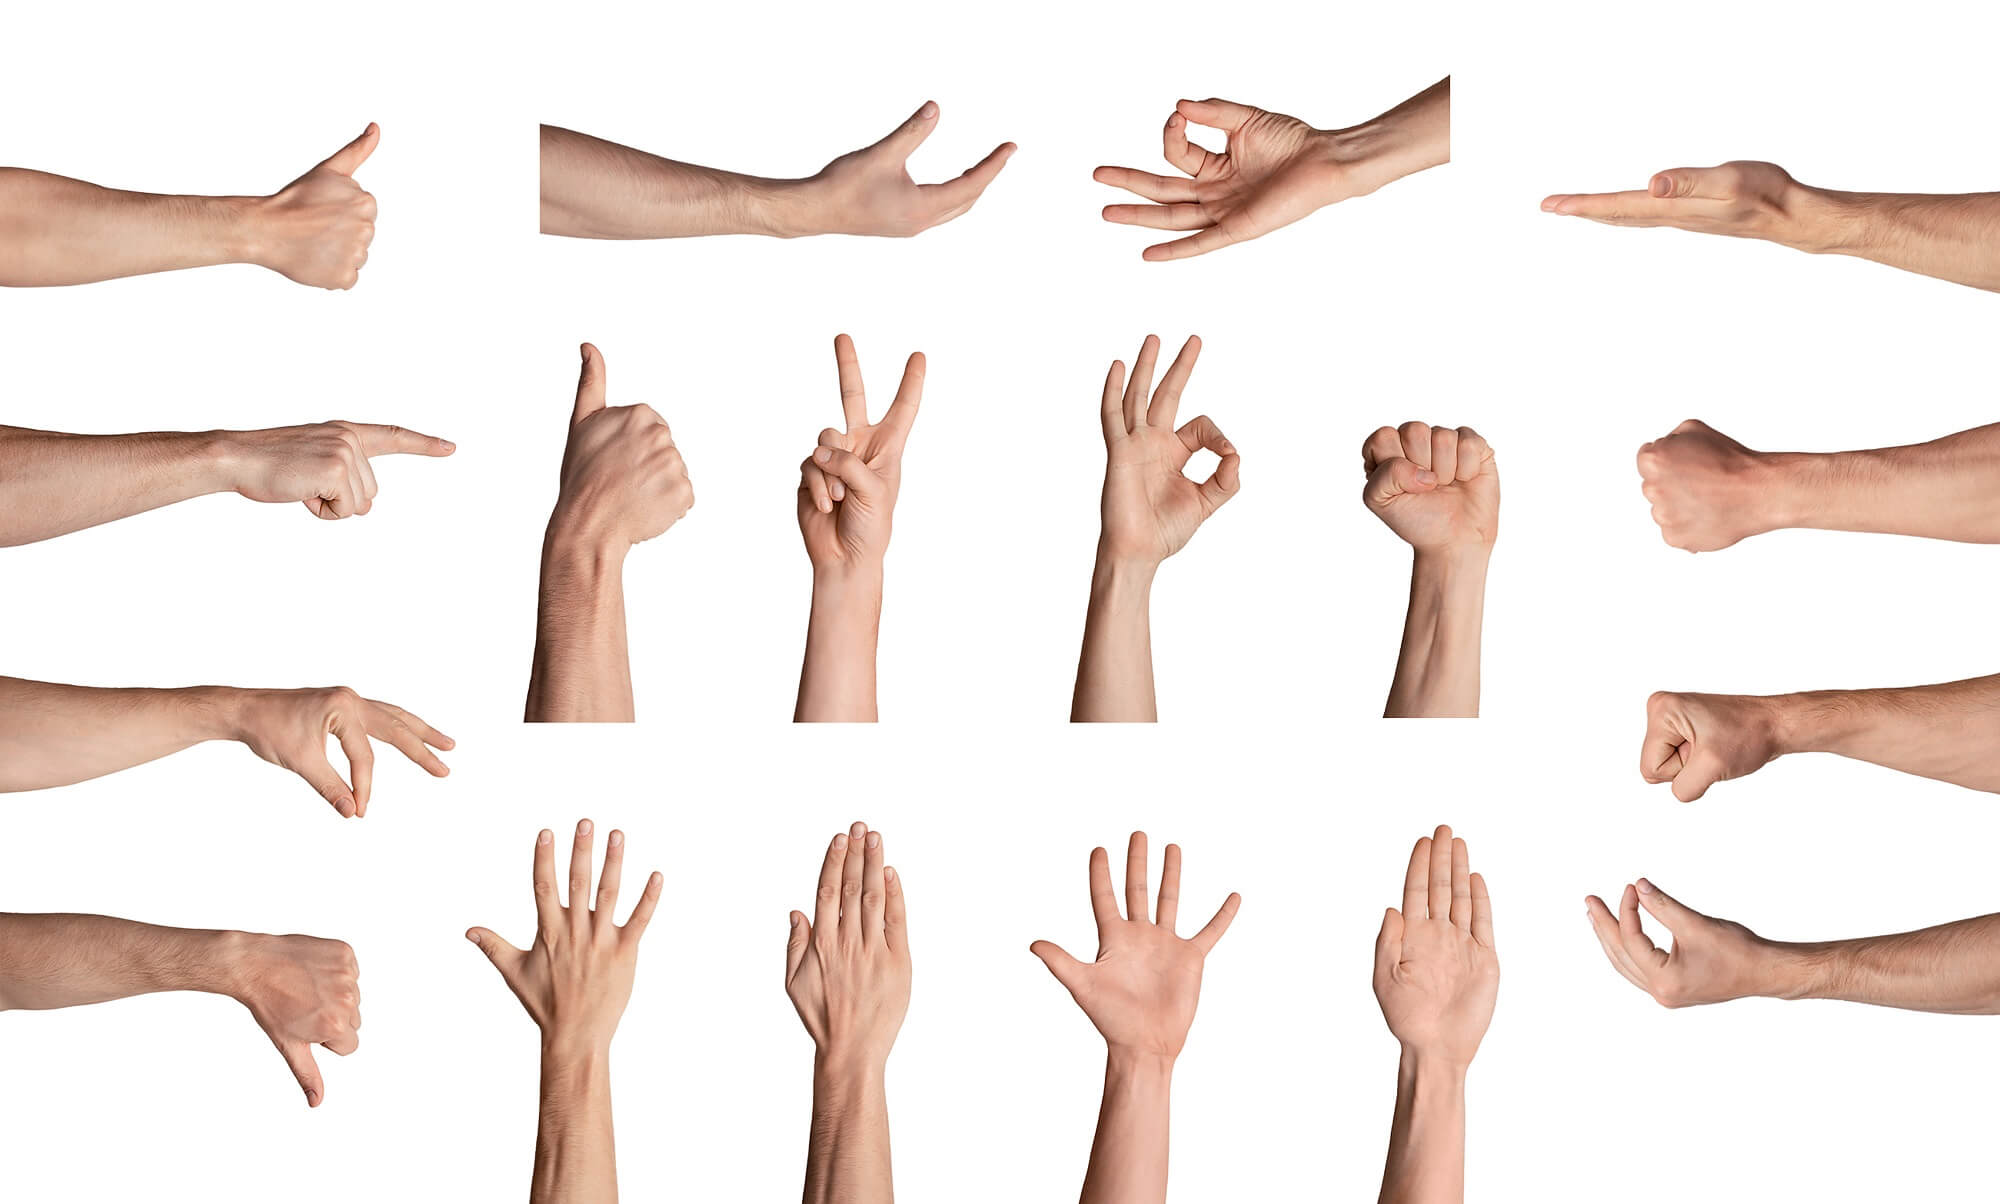 Collection of male hands gesturing different signs over white background, isolated. Collage